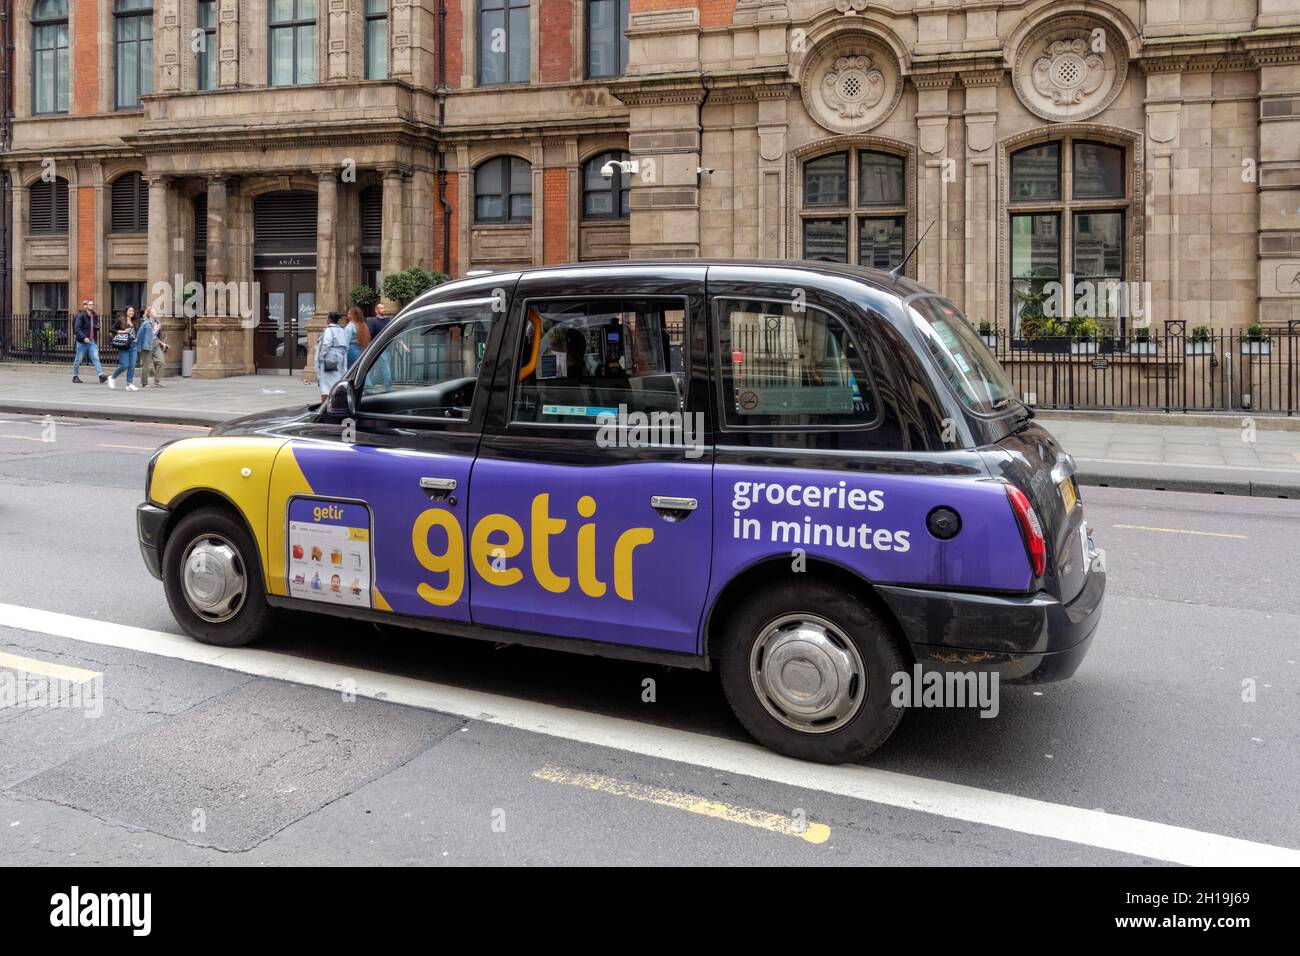 Black taxi cab advertising rapid delivery service Getir, London England United Kingdom UK Stock Photo